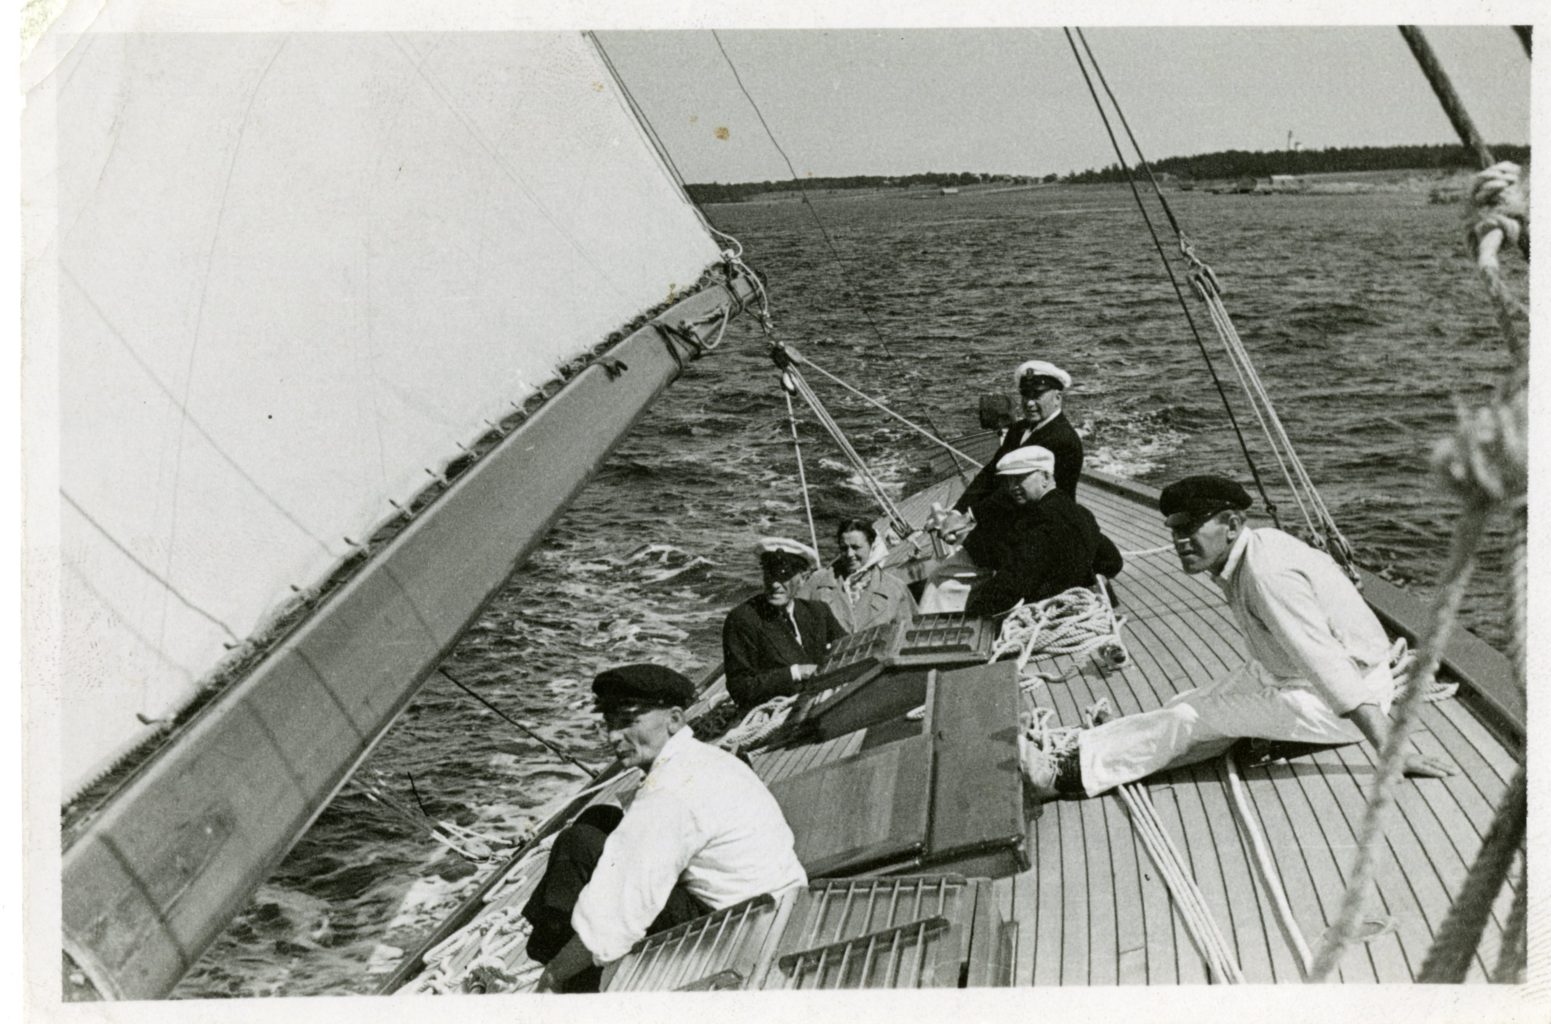 Six people on a sailboat.